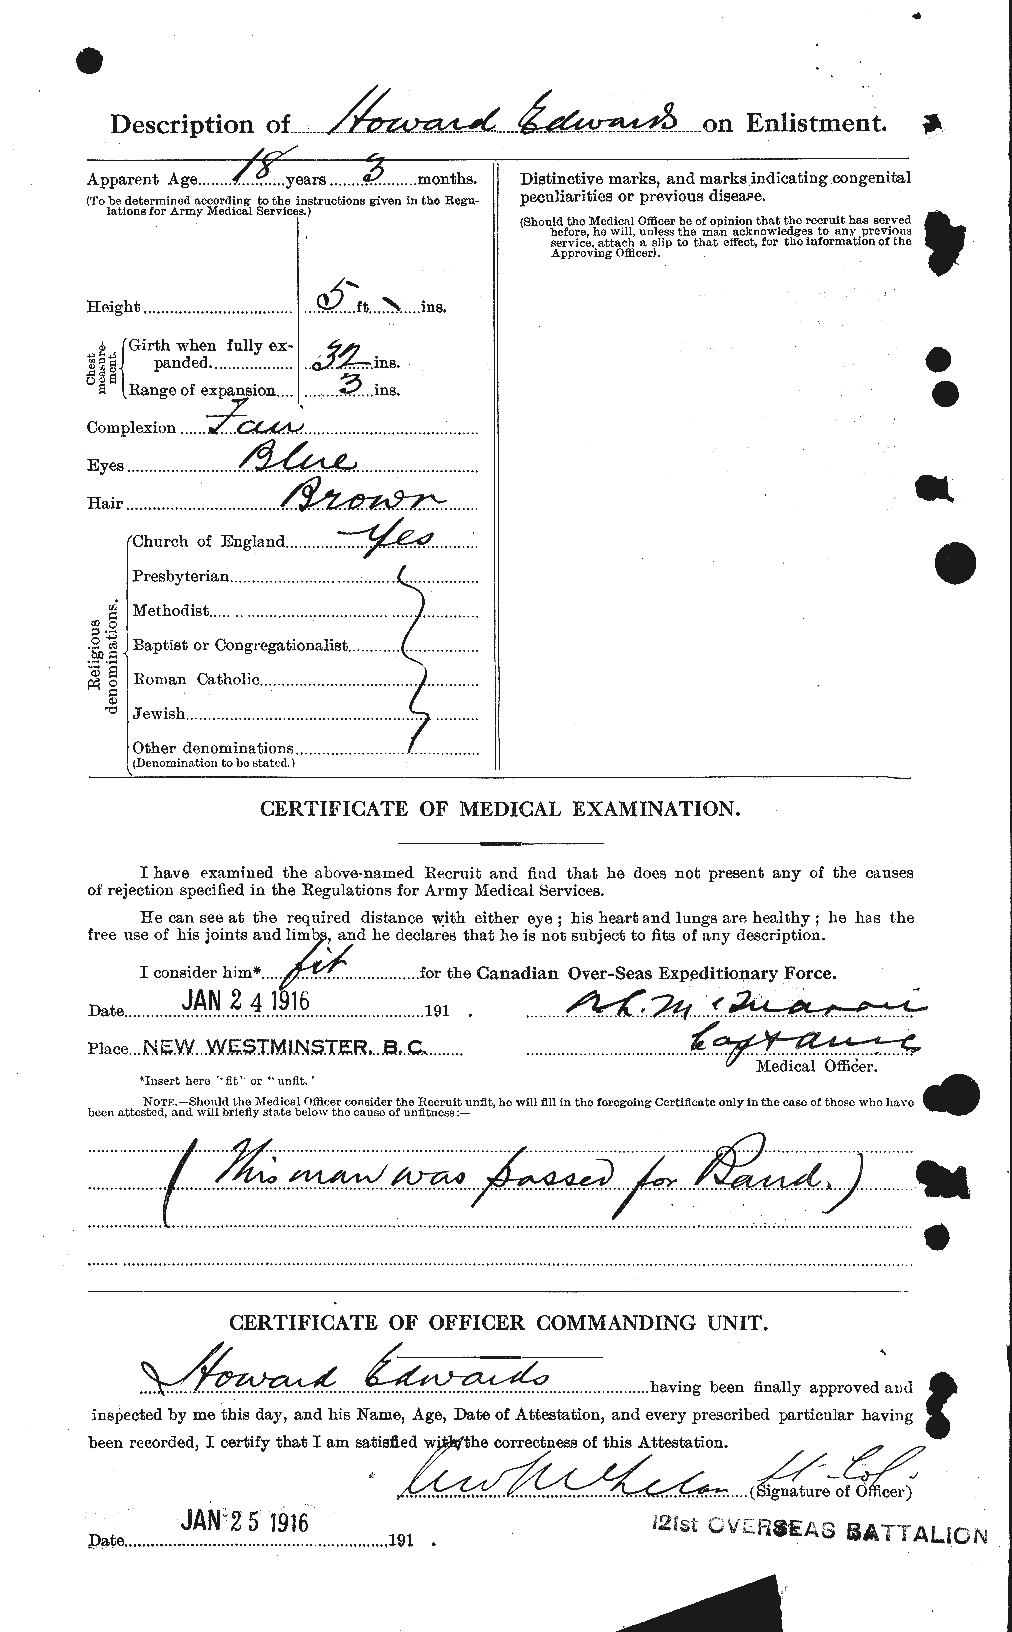 Personnel Records of the First World War - CEF 309789b